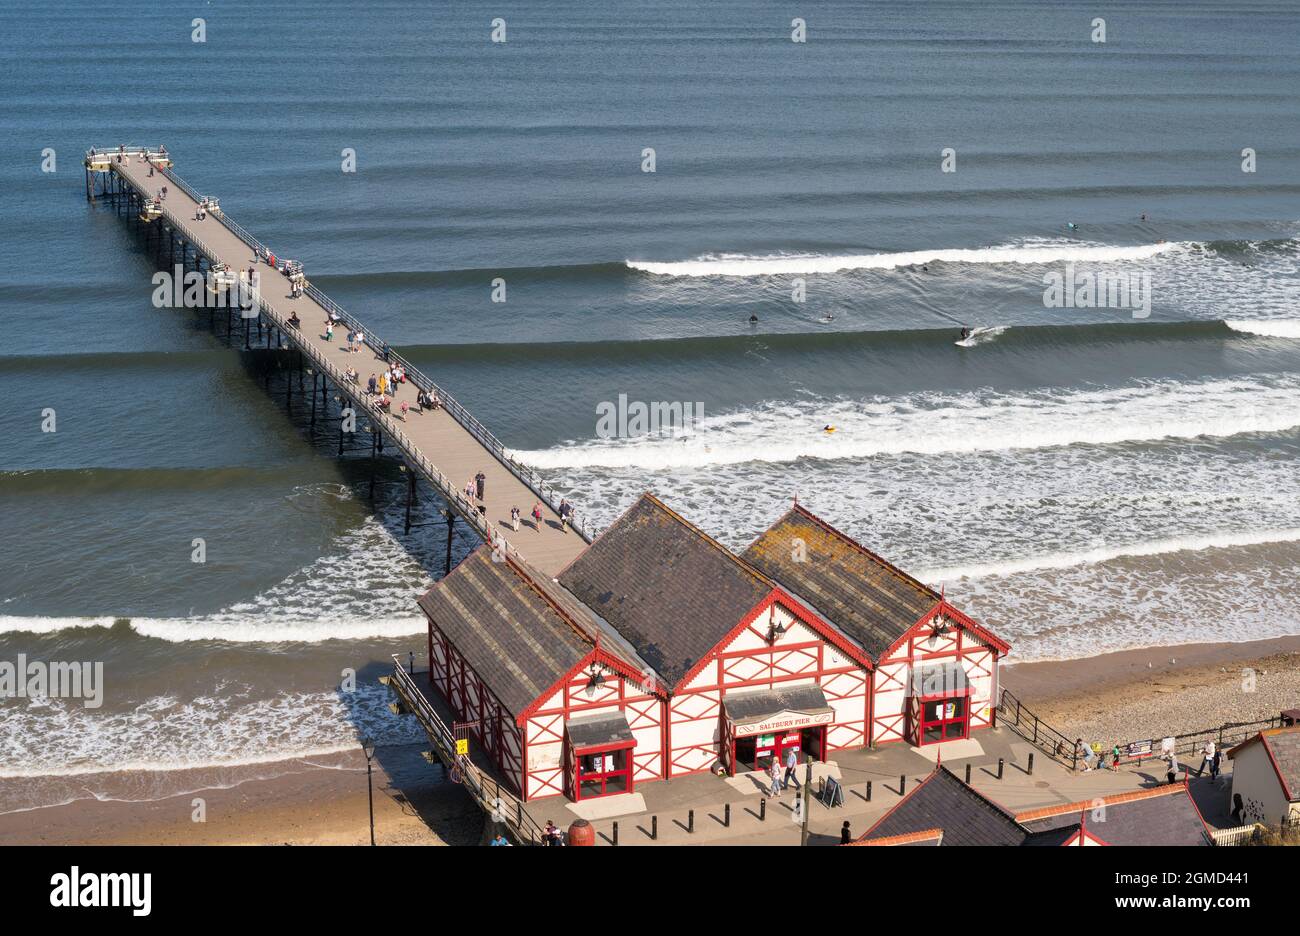 People walking along Saltburn pier with surfers in the water alongside, North Yorkshire, England, UK Stock Photo